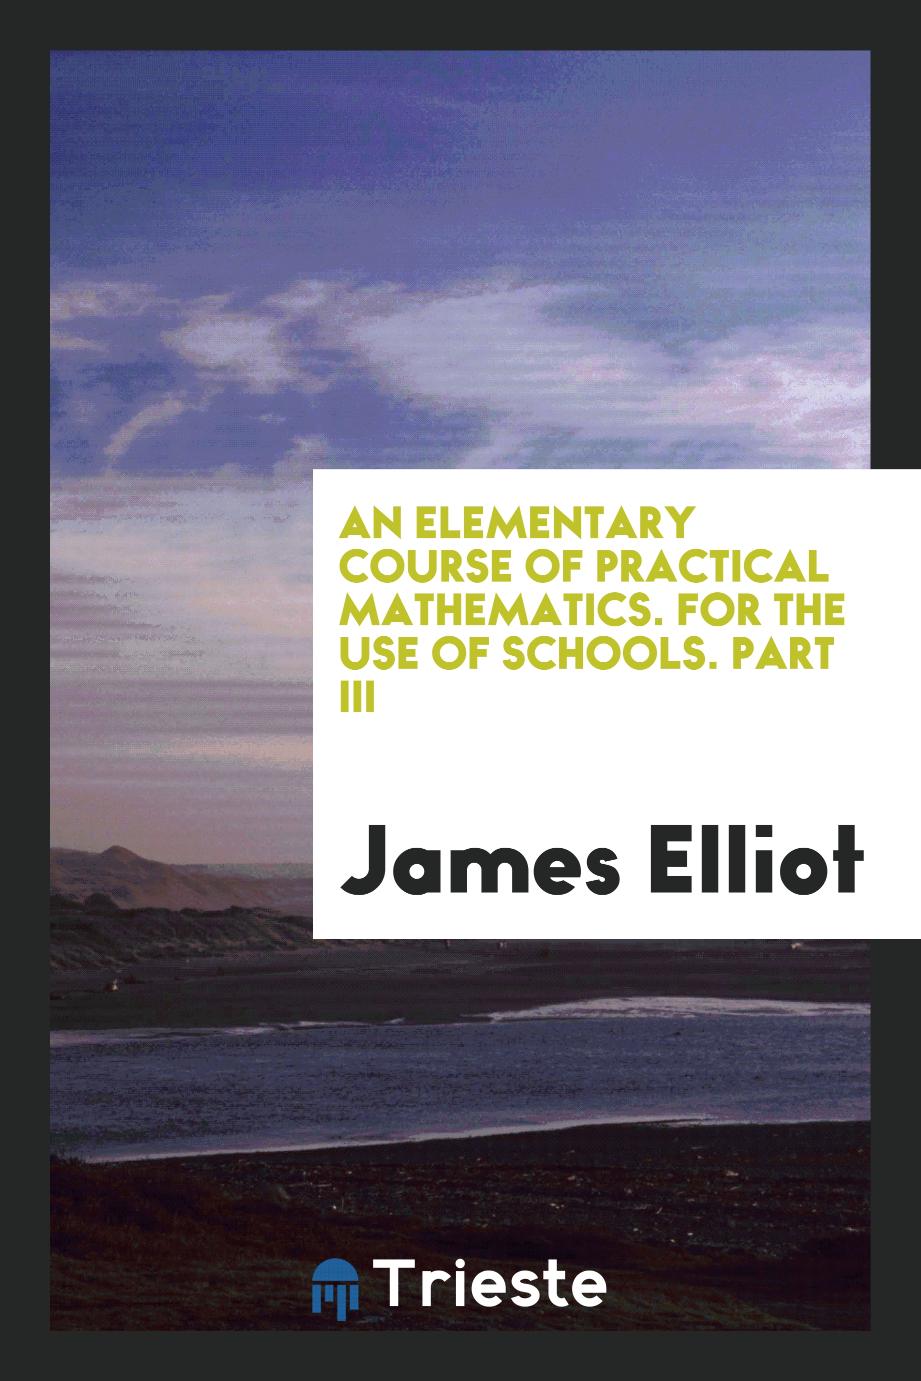 An Elementary Course of Practical Mathematics. For the Use of Schools. Part III